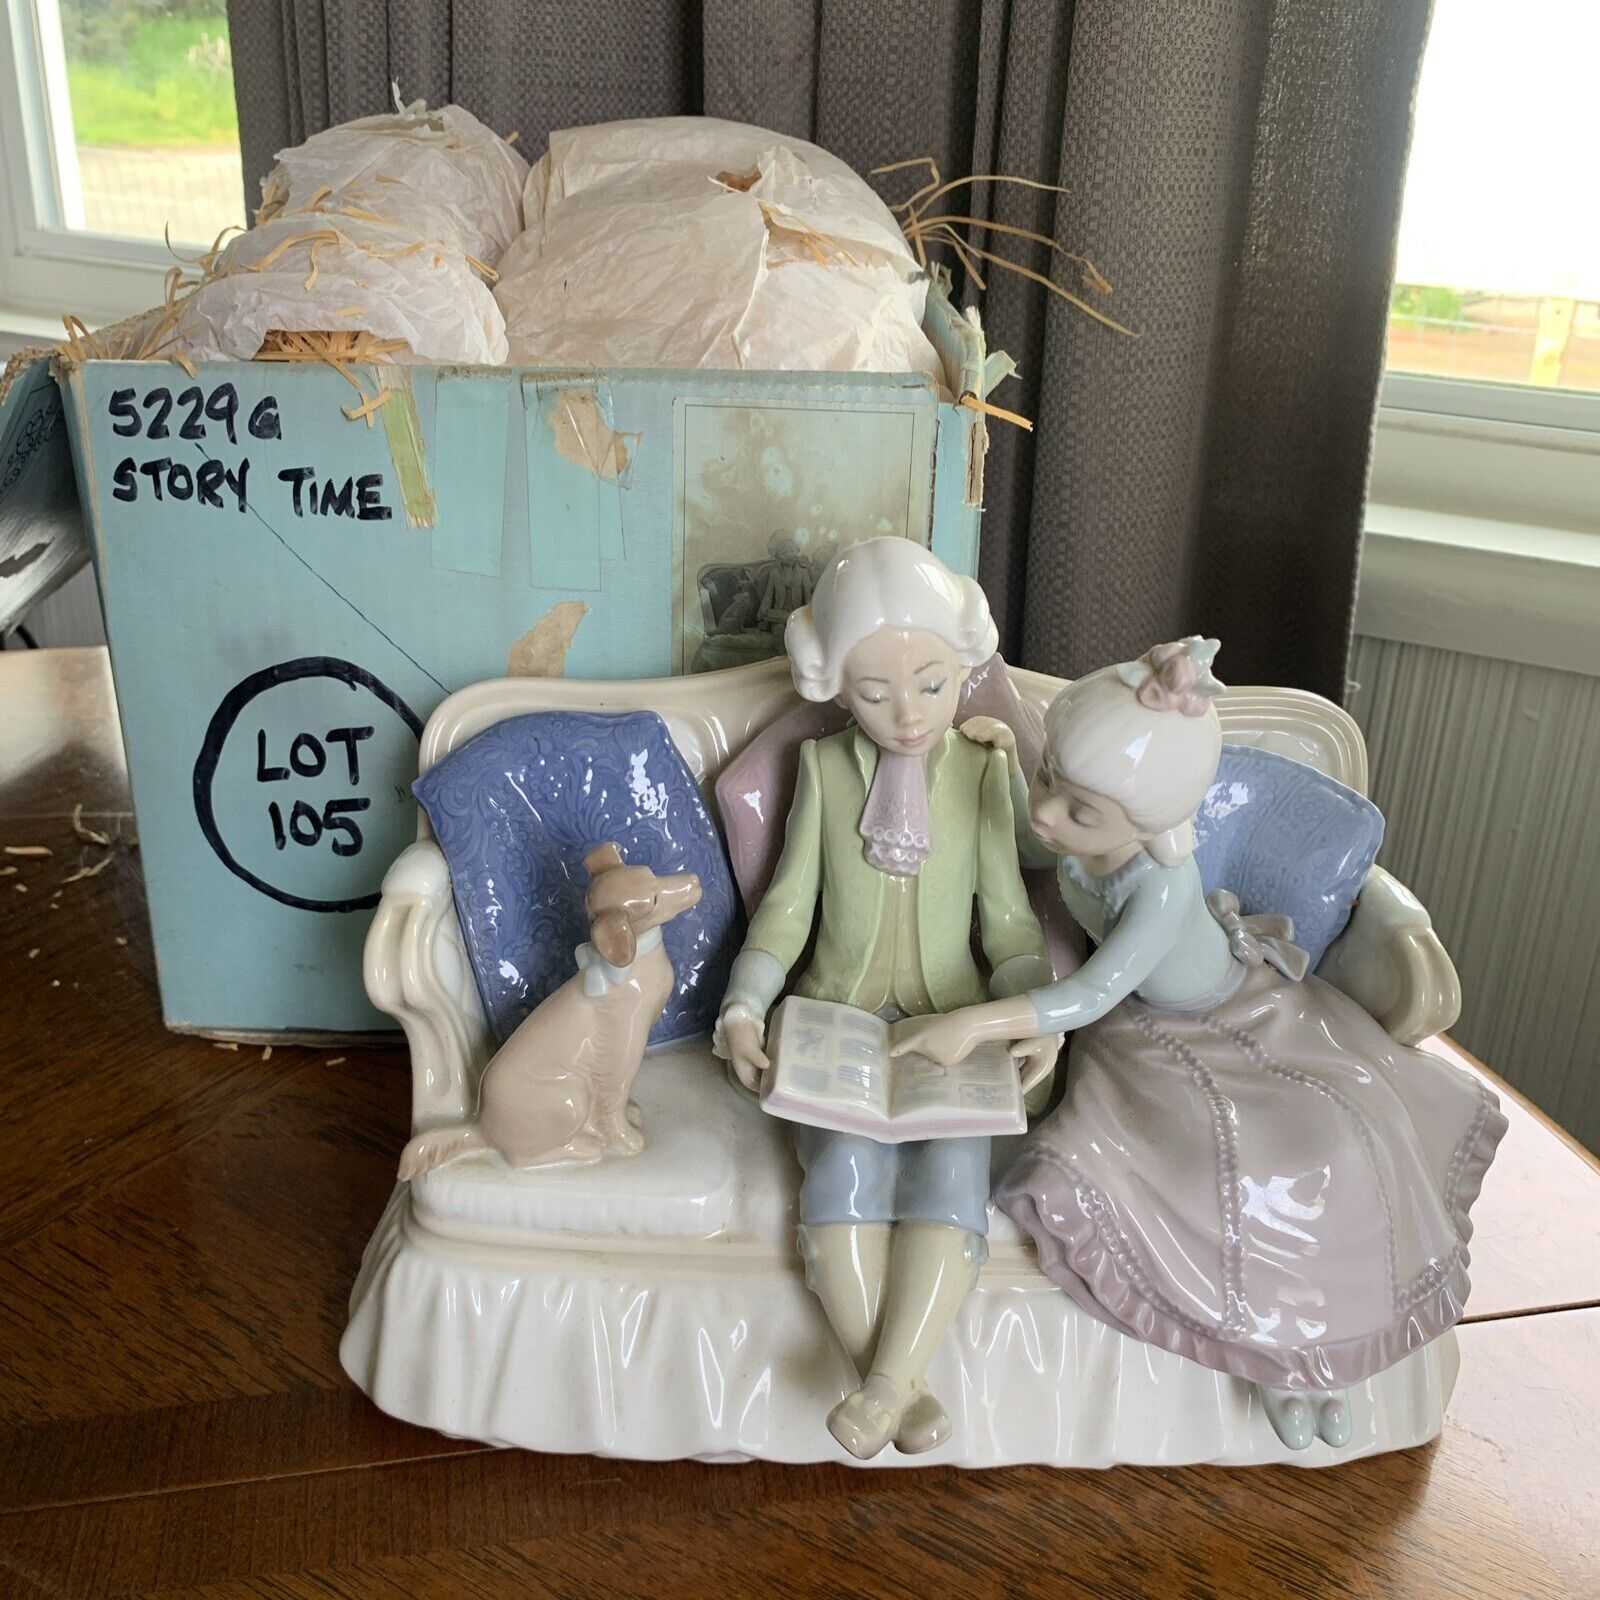 STUNNING VINTAGE RARE LLADRO STORY TIME #5229 GIRL BOY COUCH DOG RETIRED 